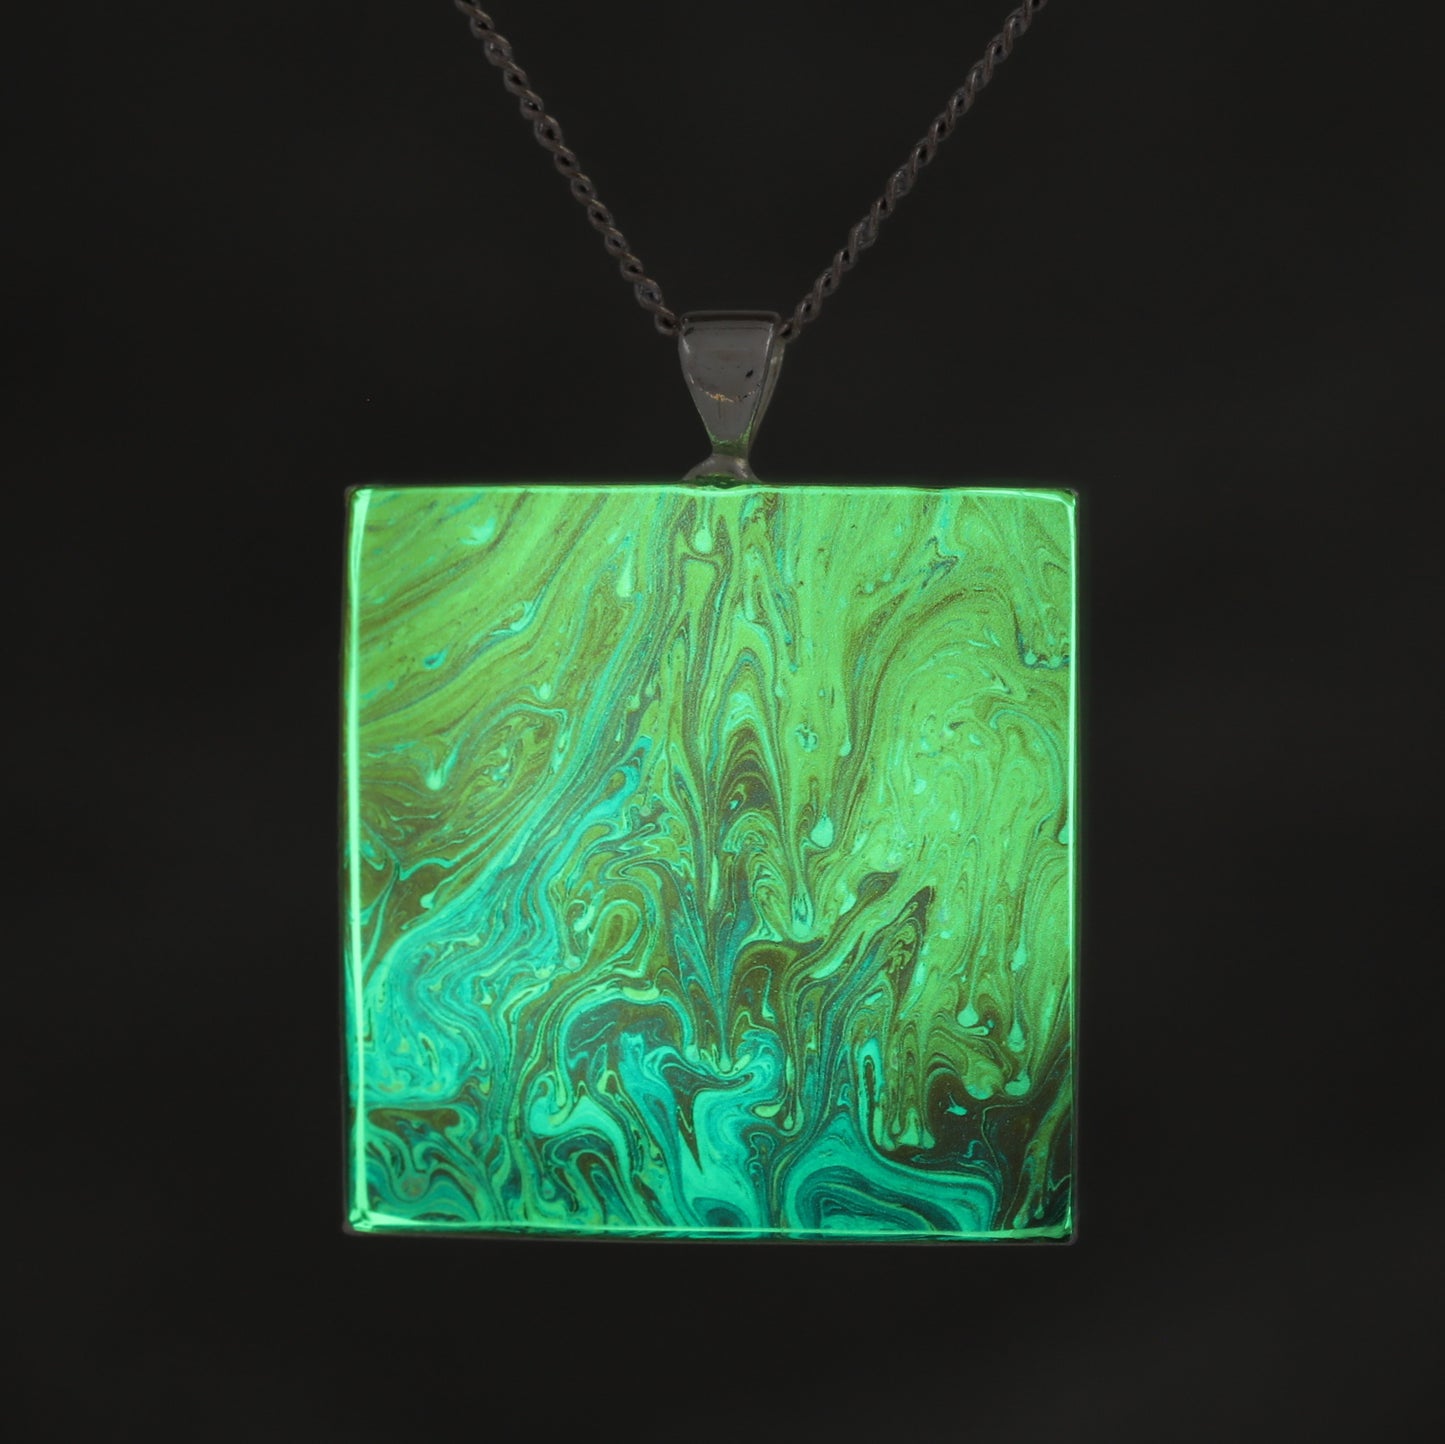 Crimson Rain - Glow-in-the-dark pendant with a beautiful abstract soap film pattern